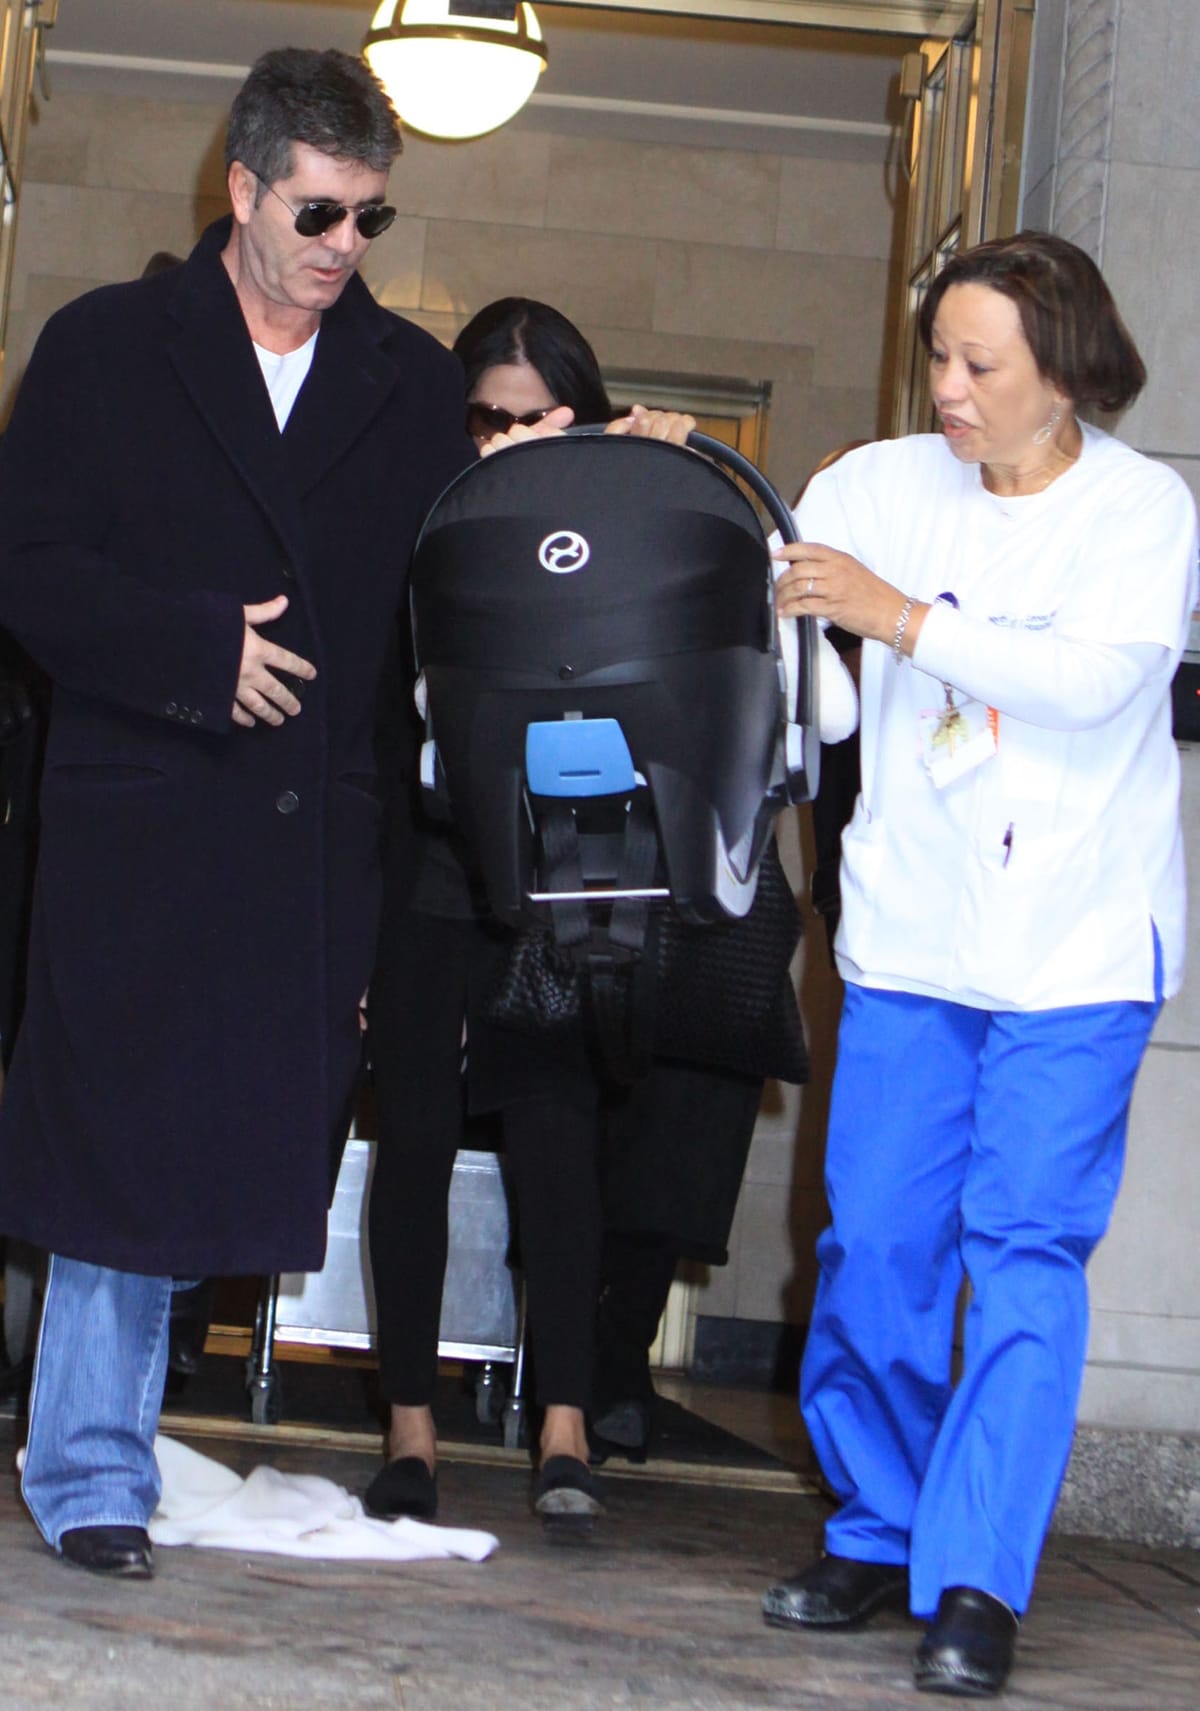 Simon Cowell leaves Lenox Hill Hospital (LHH) at the Upper East Side of Manhattan, New York City, with his newborn son Eric Cowell